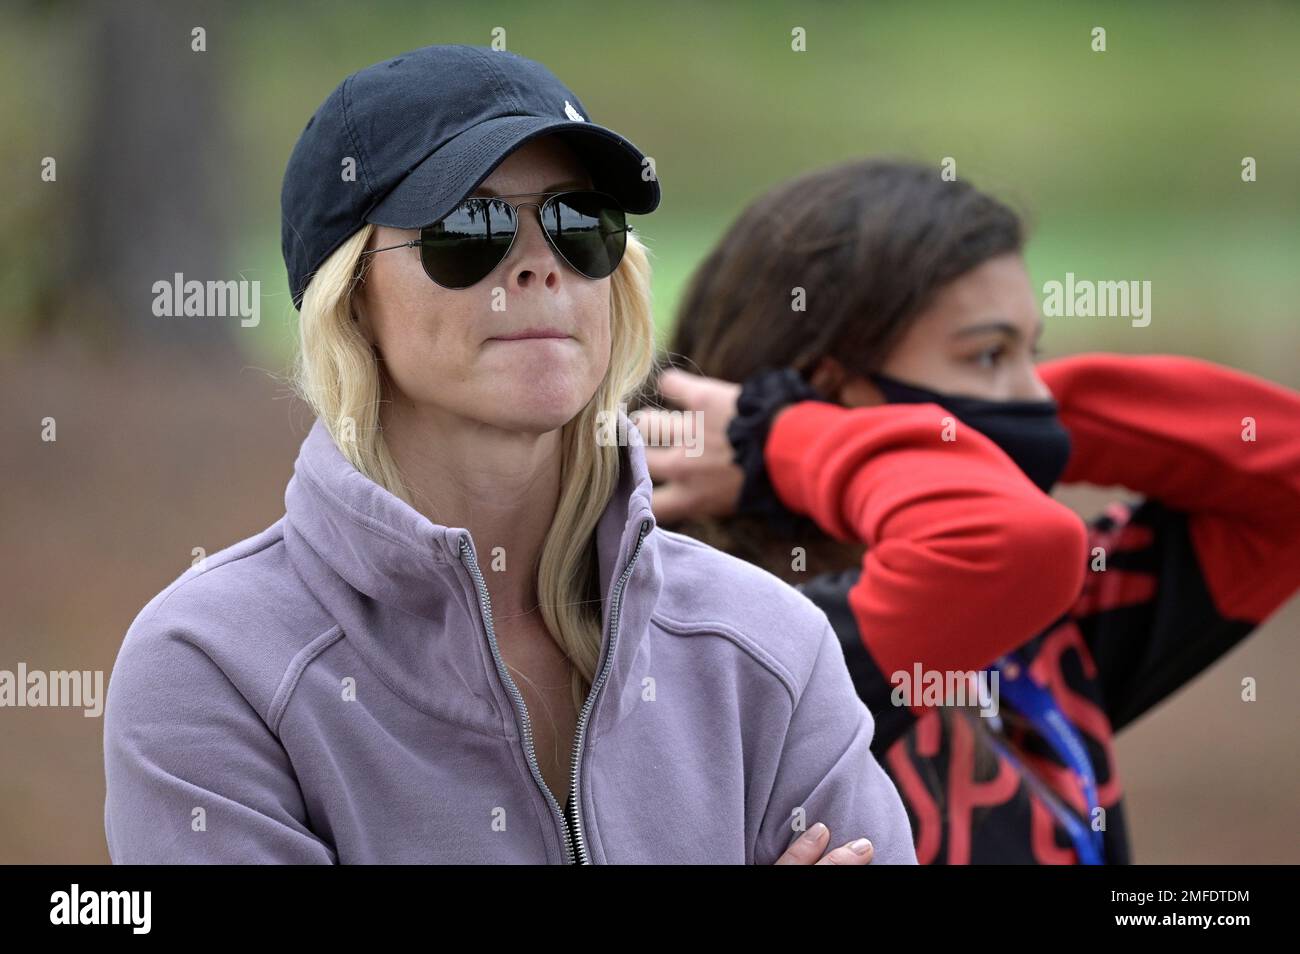 Elin Nordegren, left, and Sam Alexis Woods watch Tiger Woods and Charlie Woods on the 18th hole during the final round of the PNC Championship golf tournament, Sunday, Dec